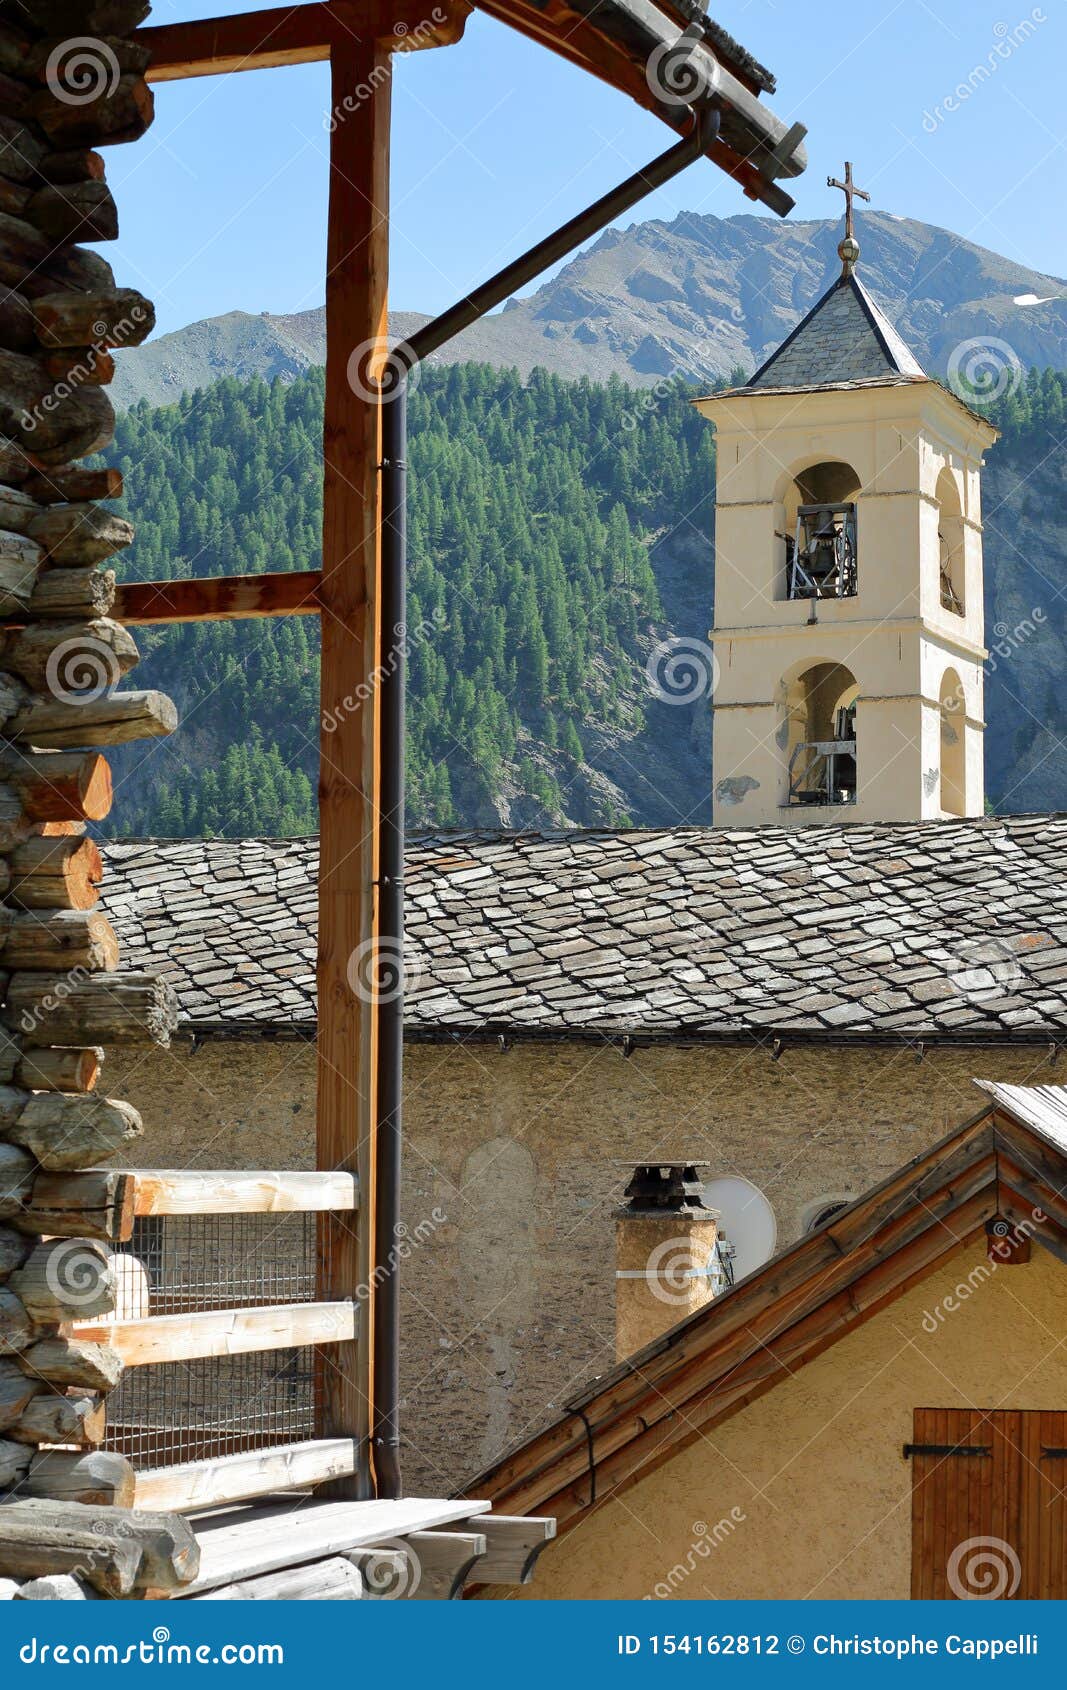 the church of saint veran with a traditional wooden house in the foreground and mountains in the background